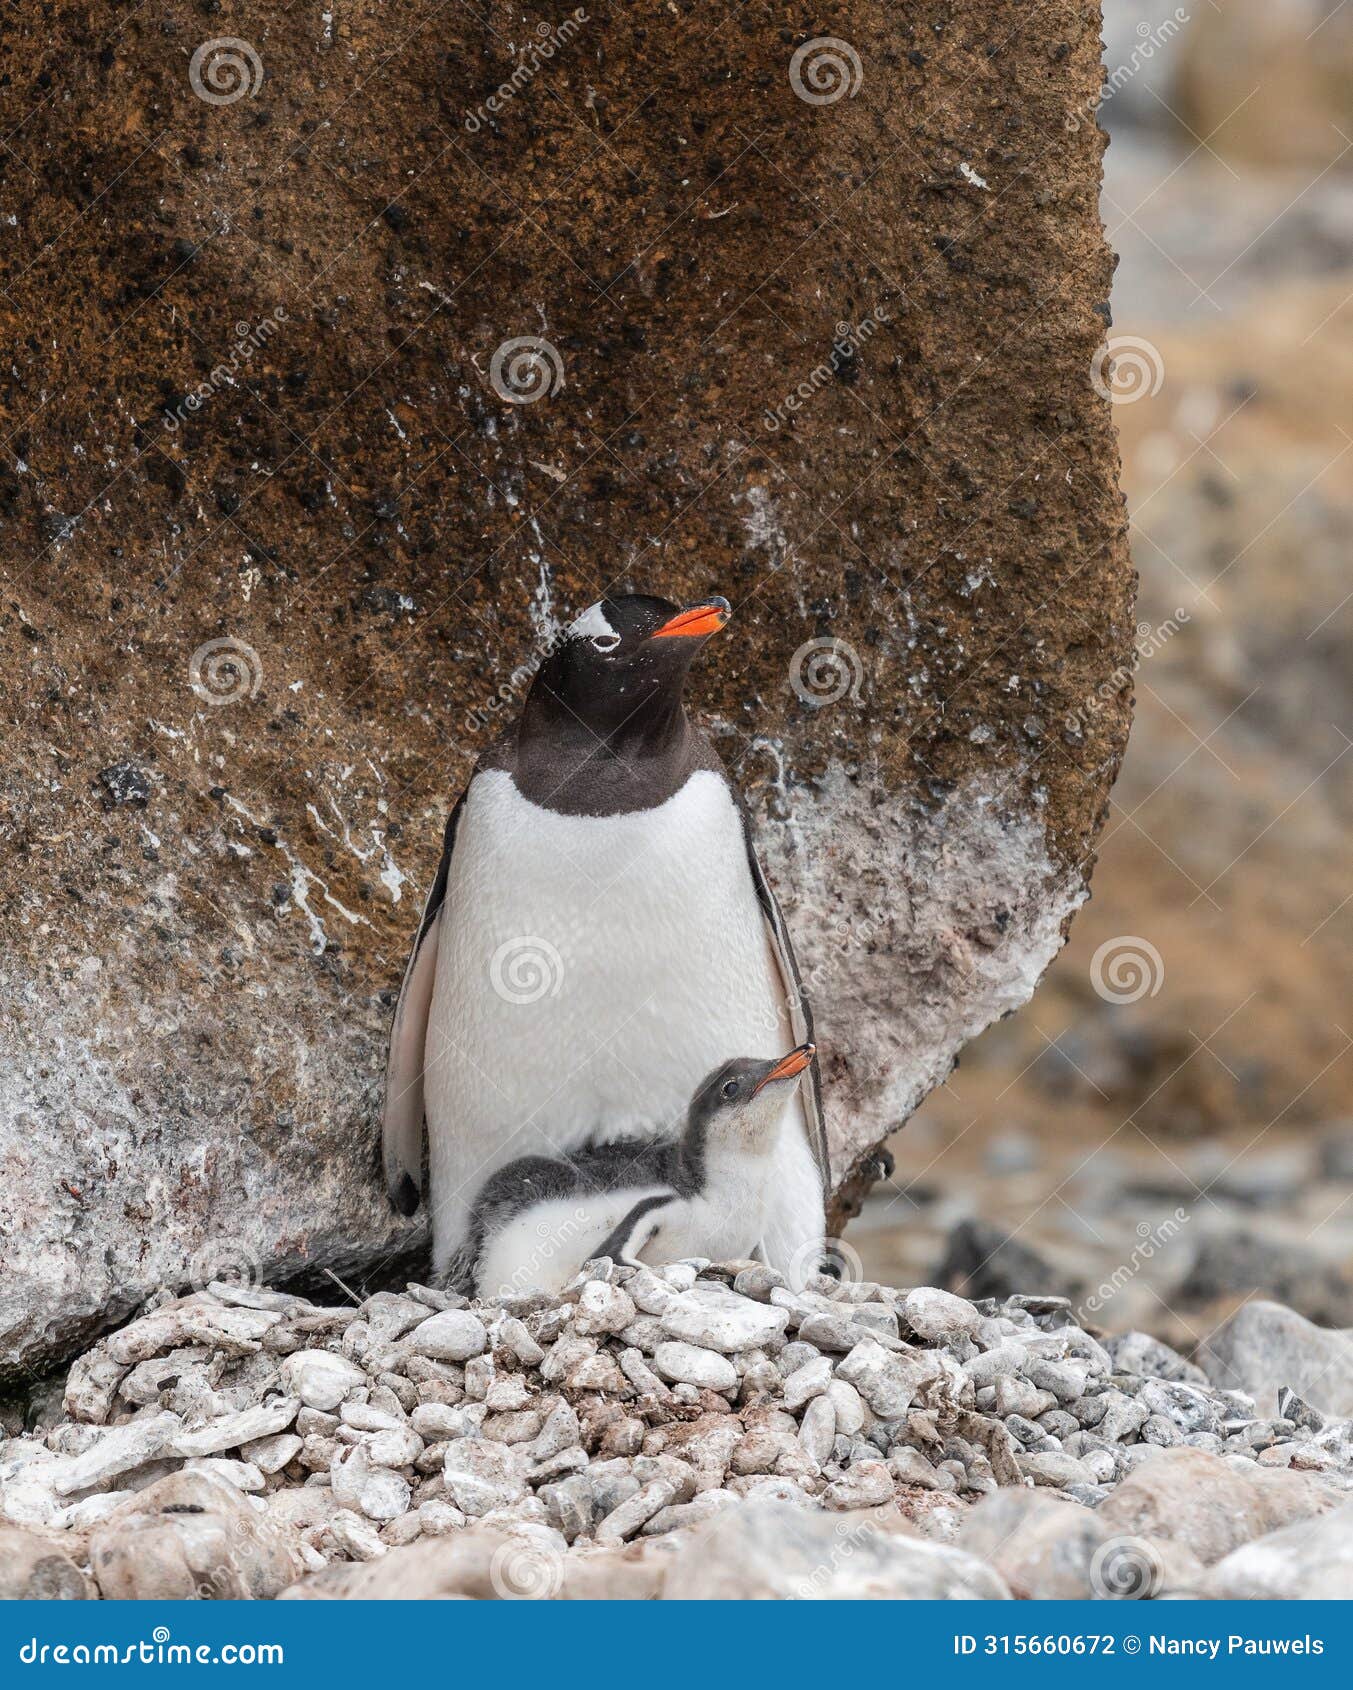 gentoo penguin with young chick on nest, brown bluff, antarctica.